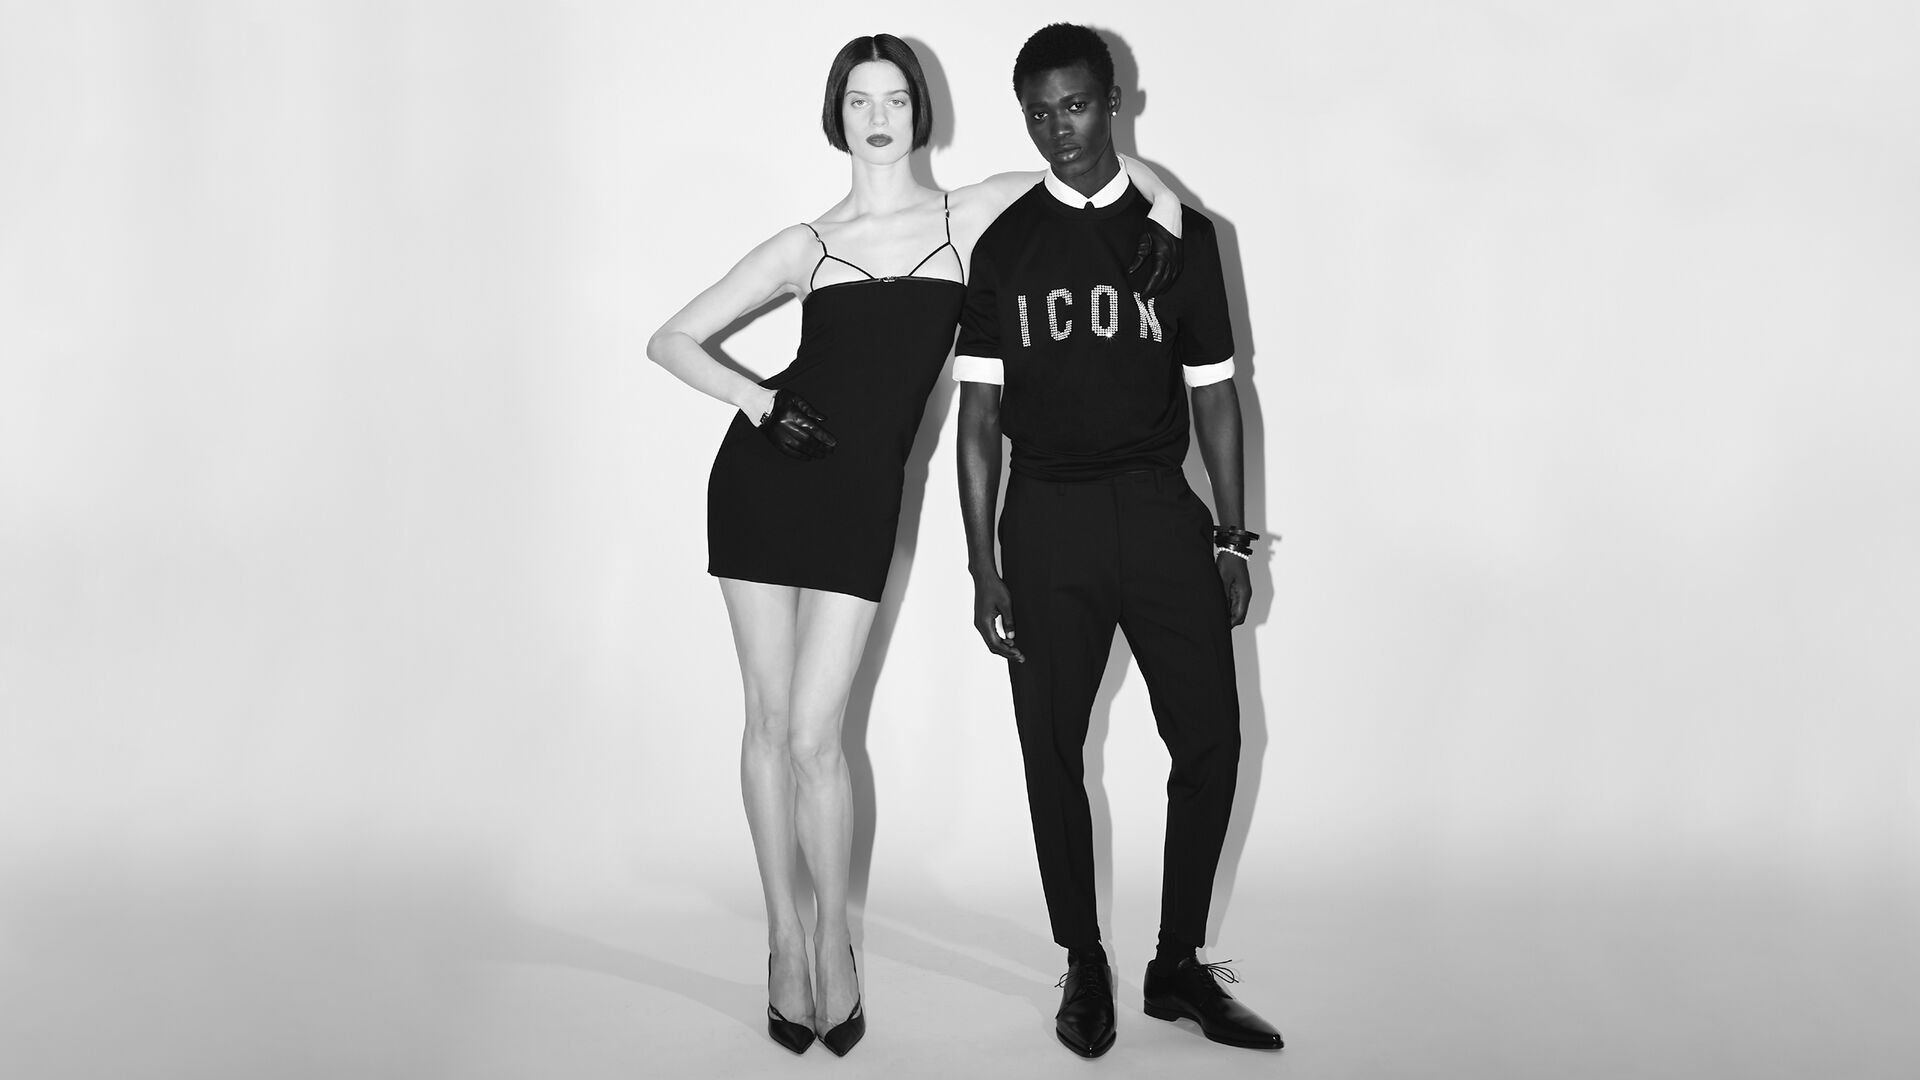 picture in black and white of man and woman. The man is wearing a black tshirt with white ICON logo and black elegant pants. the woman is wearing a black tight dress with high heels. 